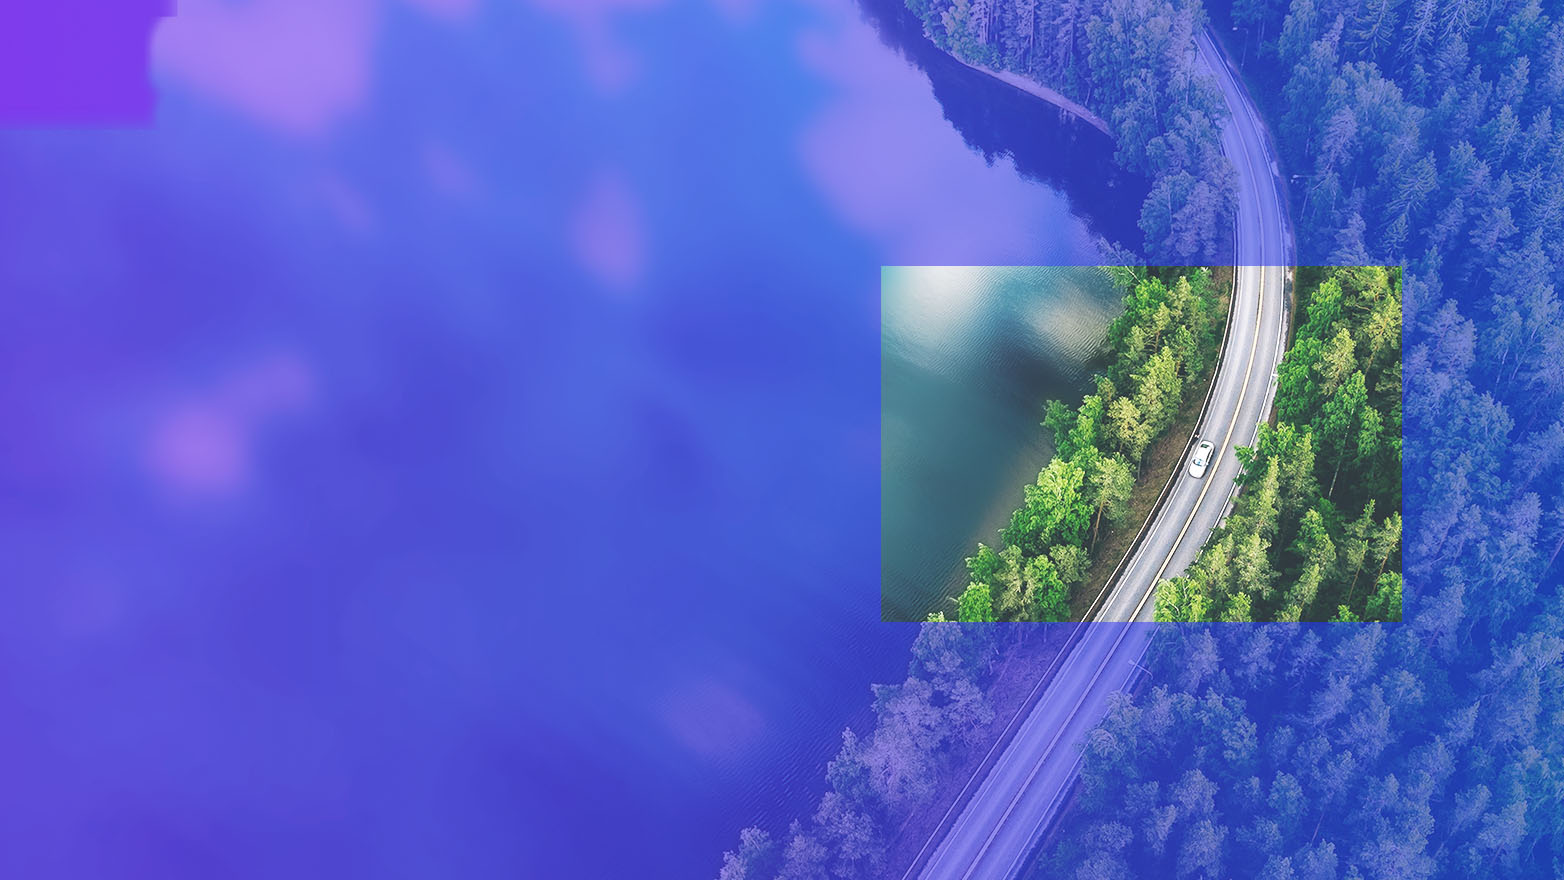 sky view of road surrounded by trees